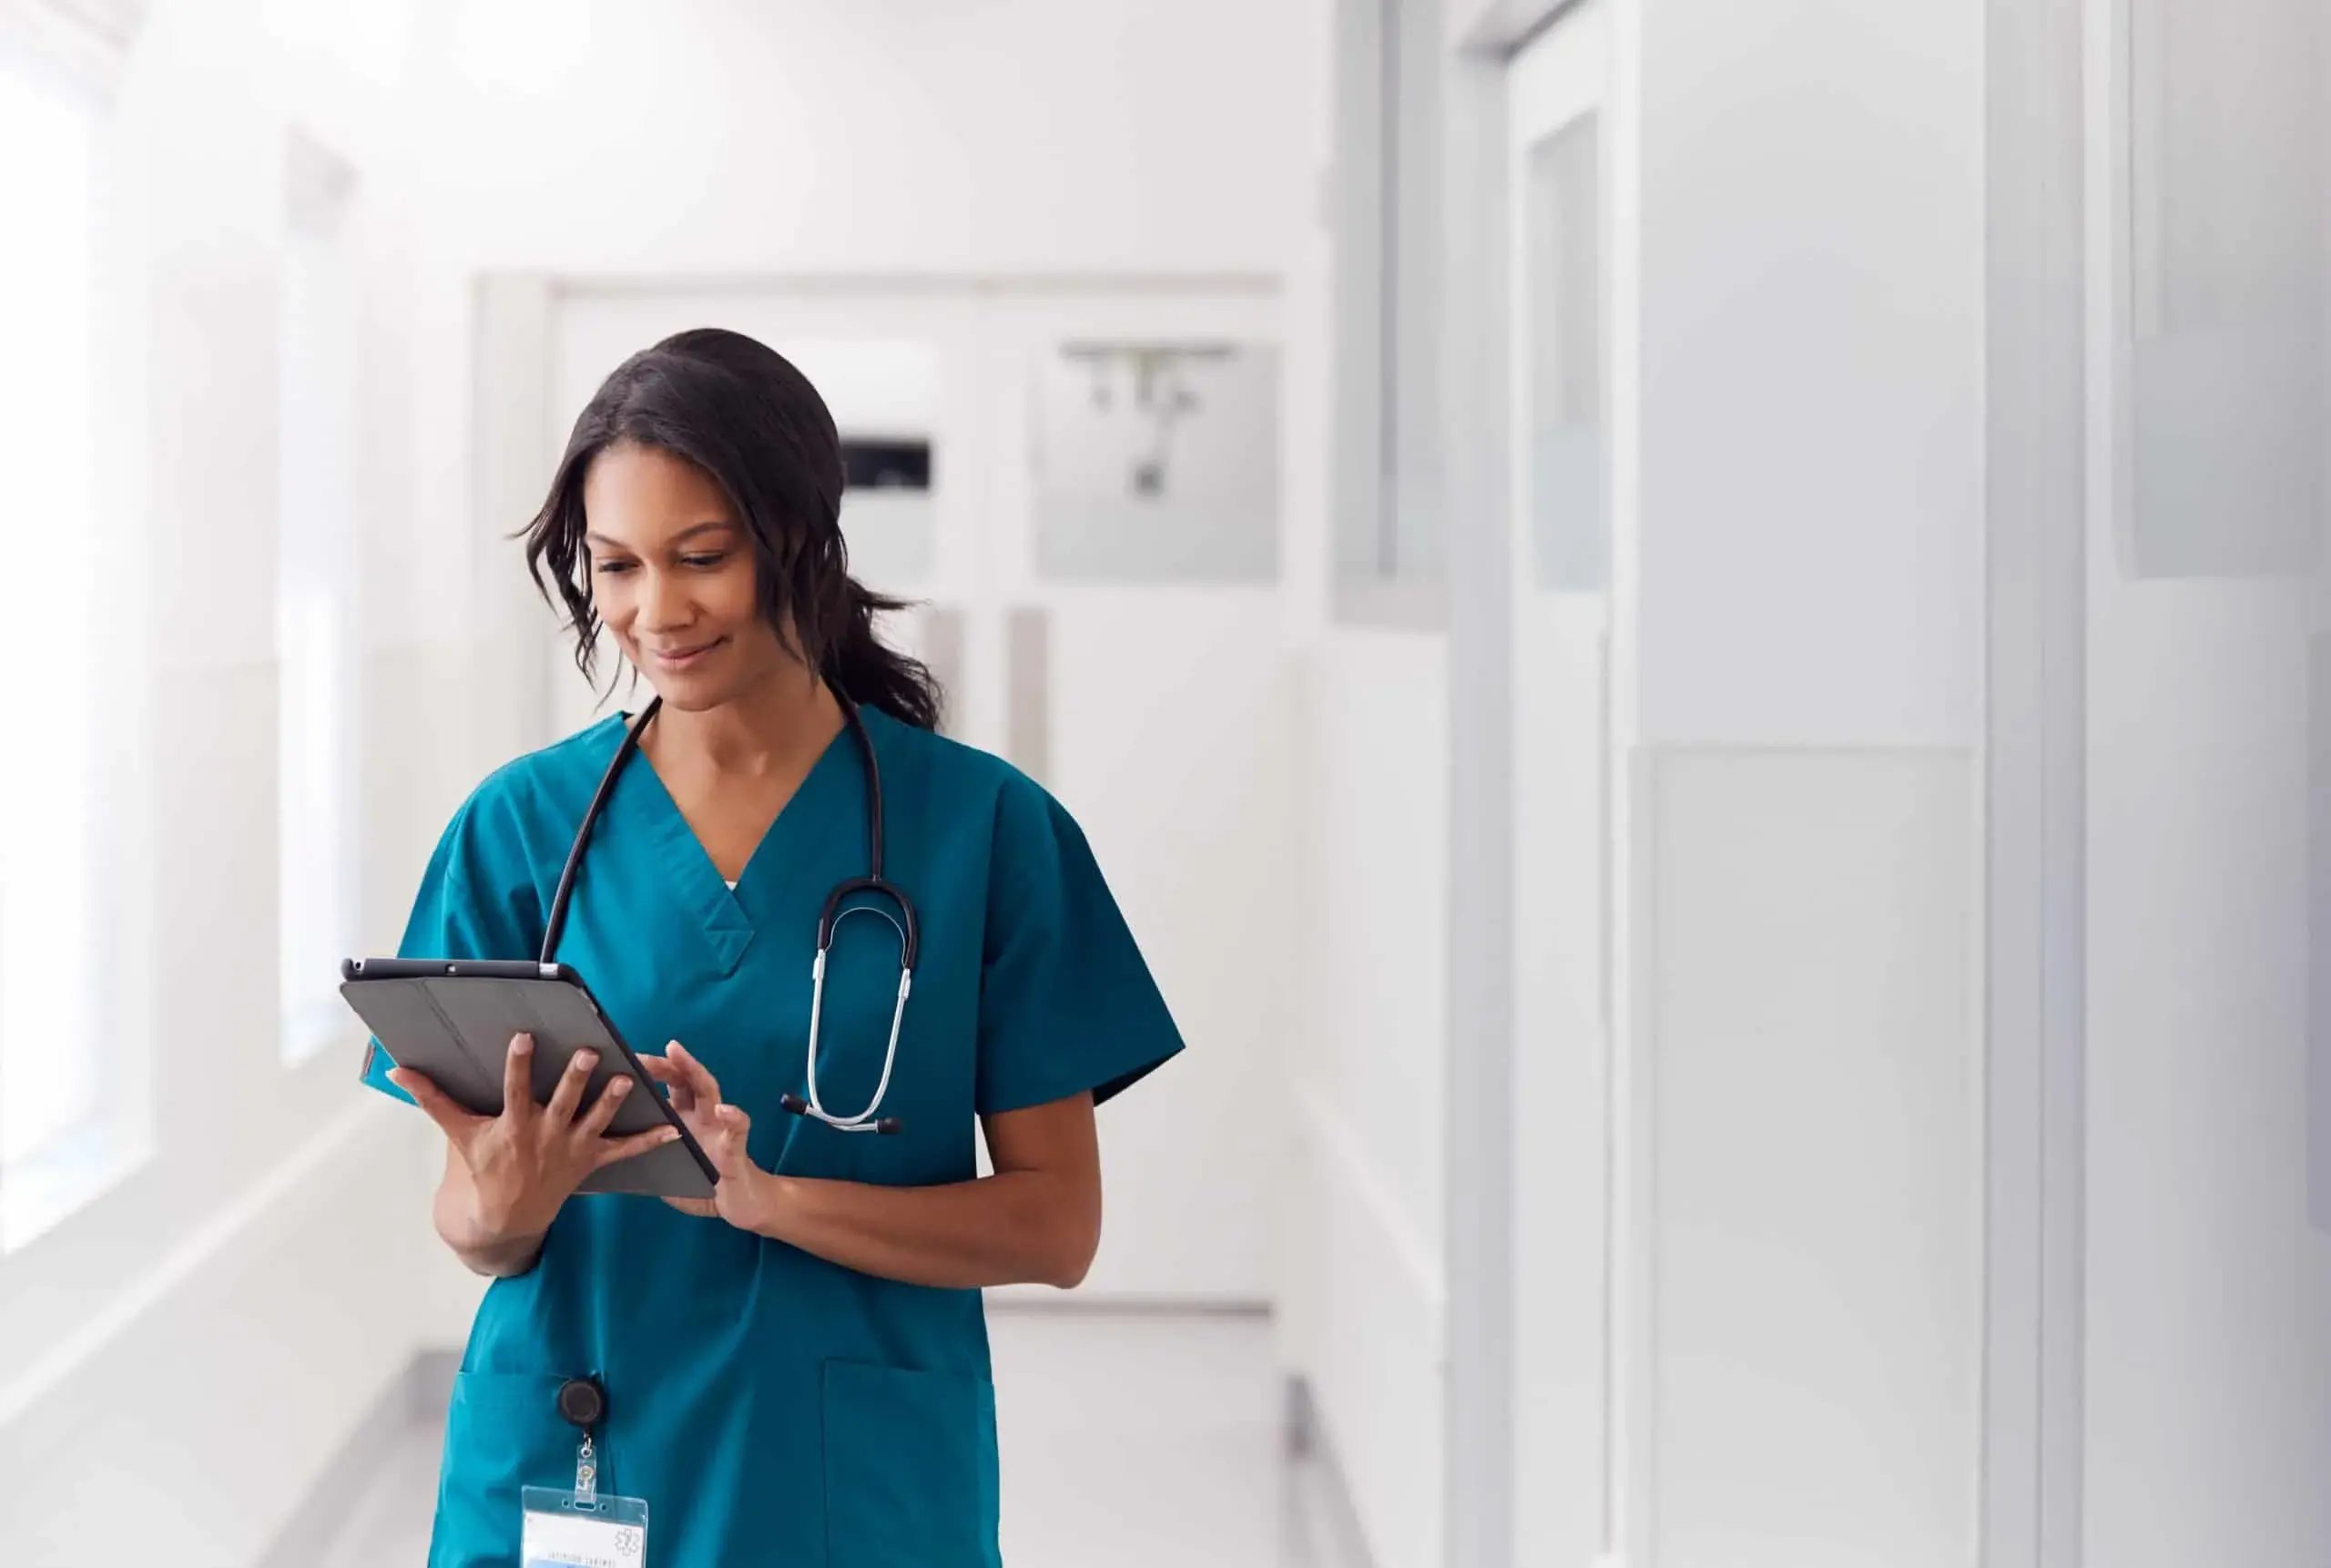 How to develop an EHR System - Case Study